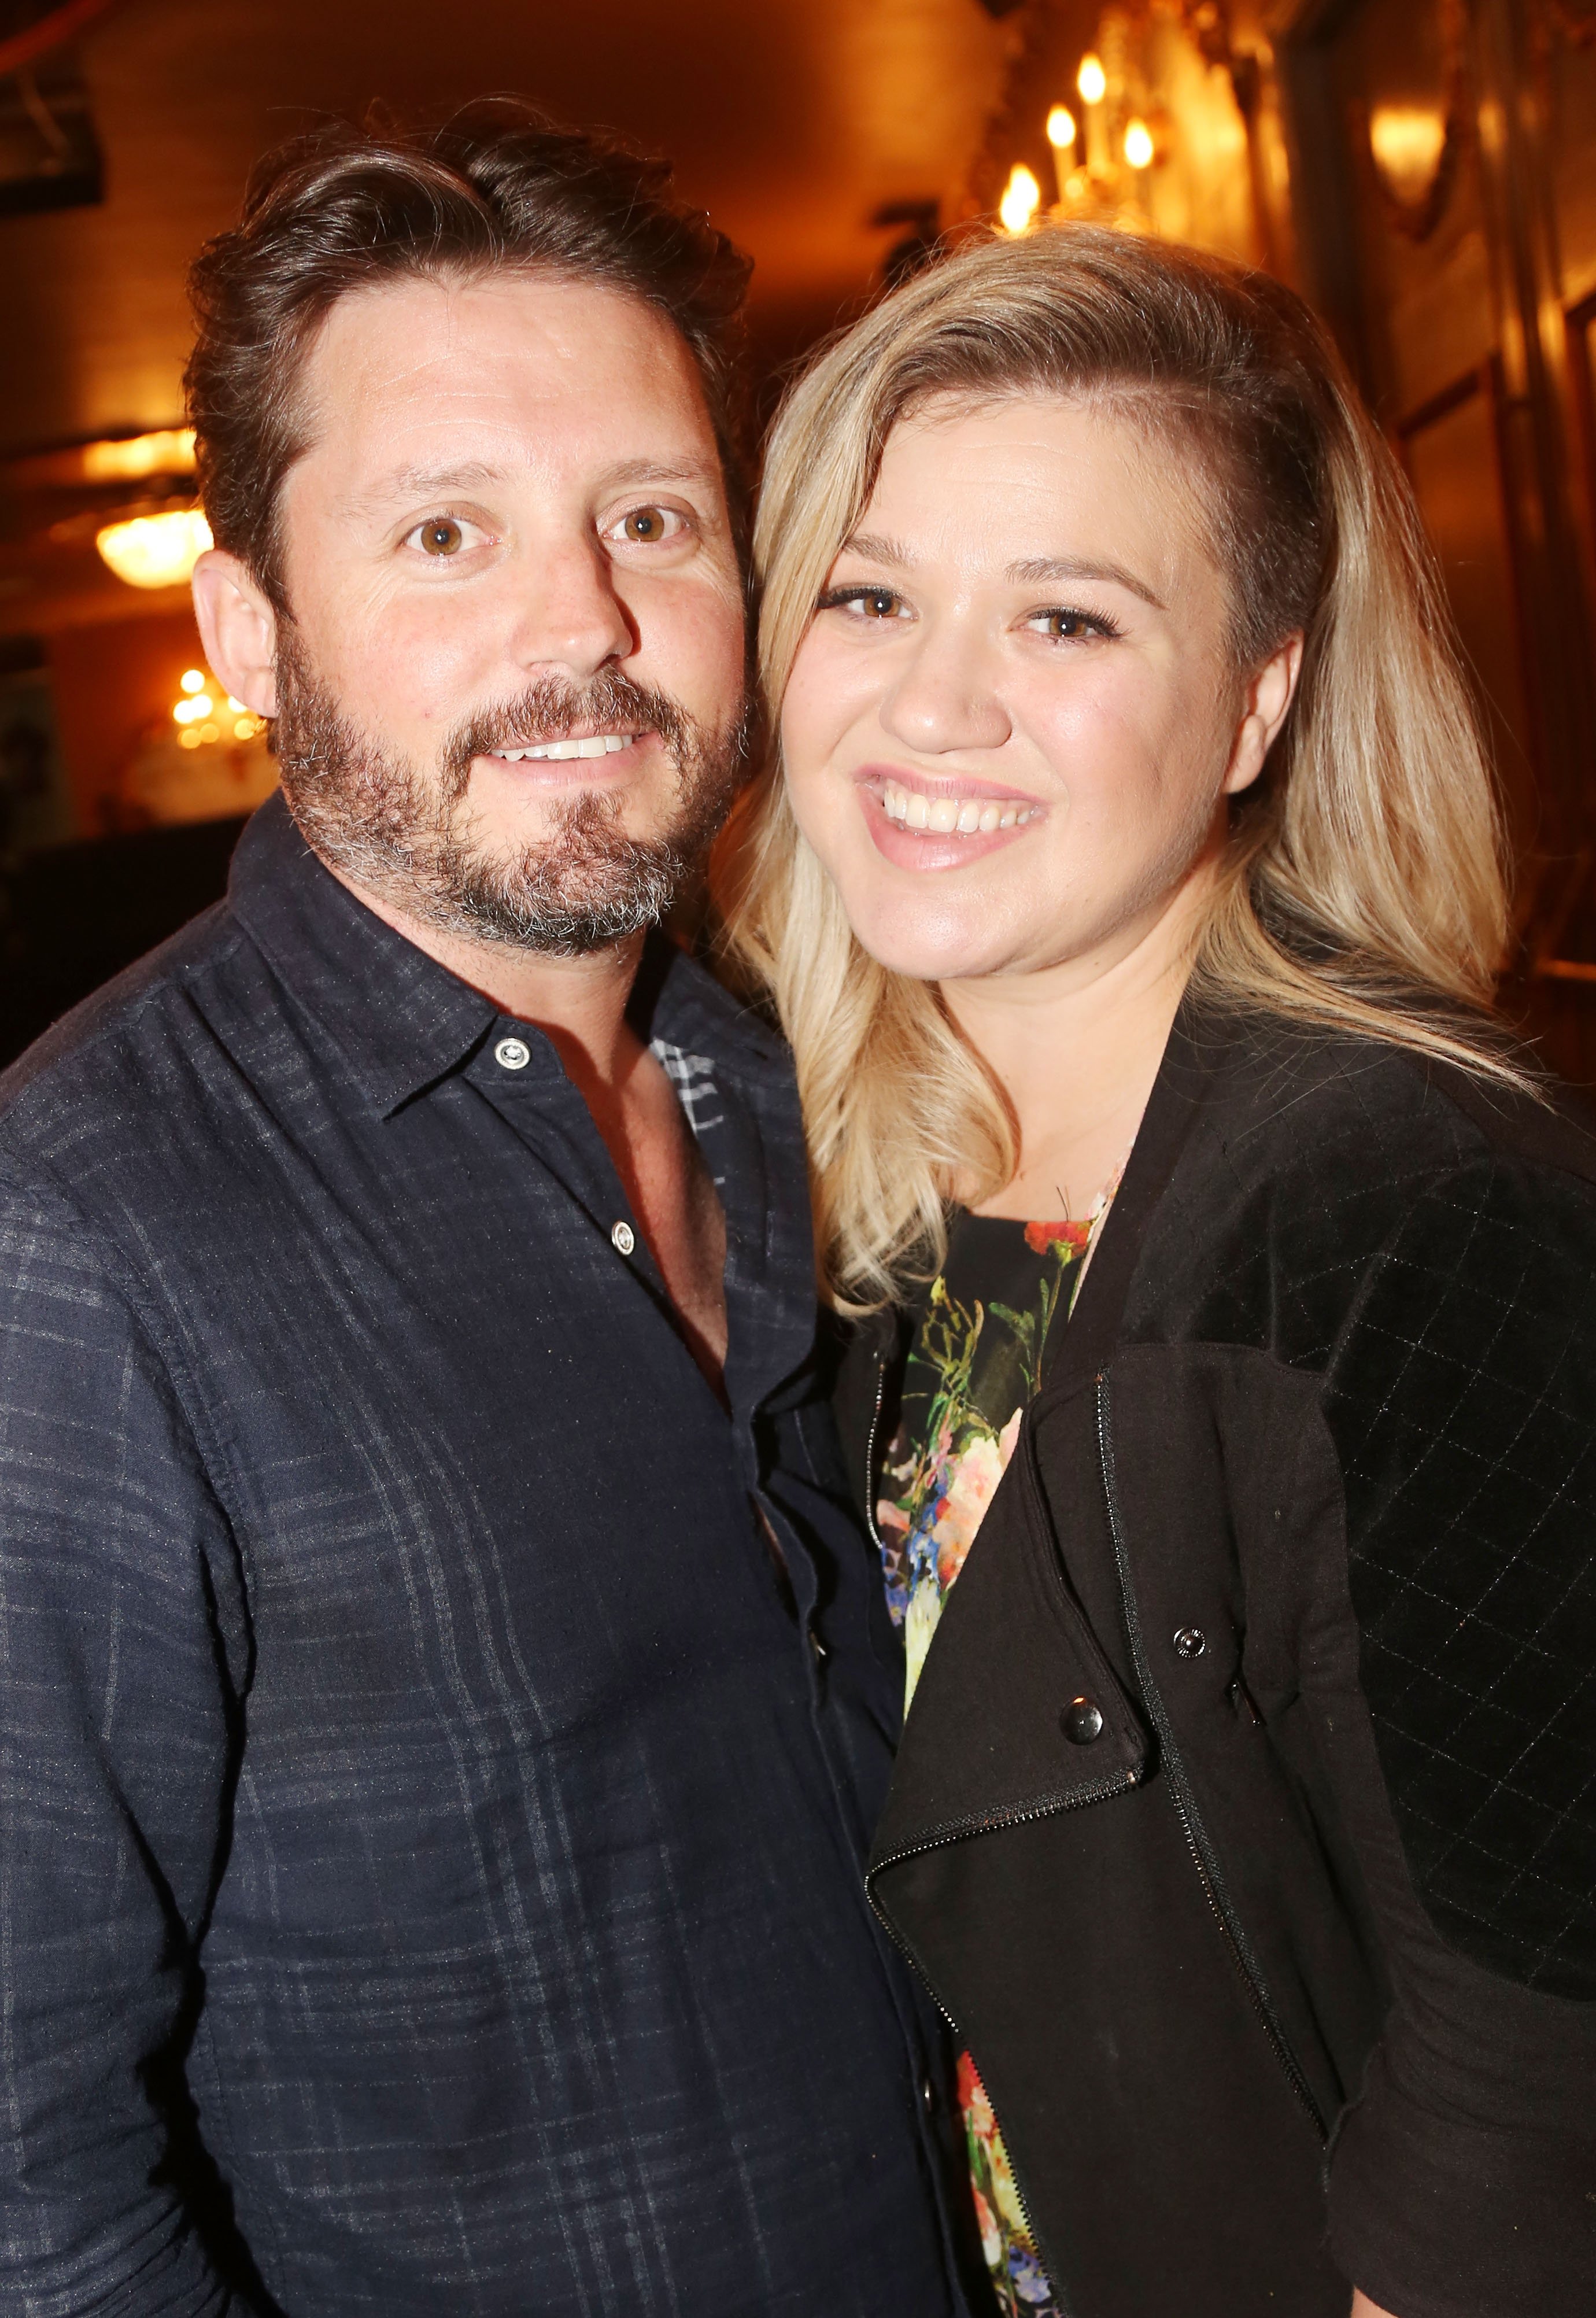 Brandon Blackstock and wife Kelly Clarkson pose backstage at the hit musical "Finding Neverland" on Broadway at The Lunt Fontanne Theater on July 15, 2015 in New York City. | Source: Getty Images